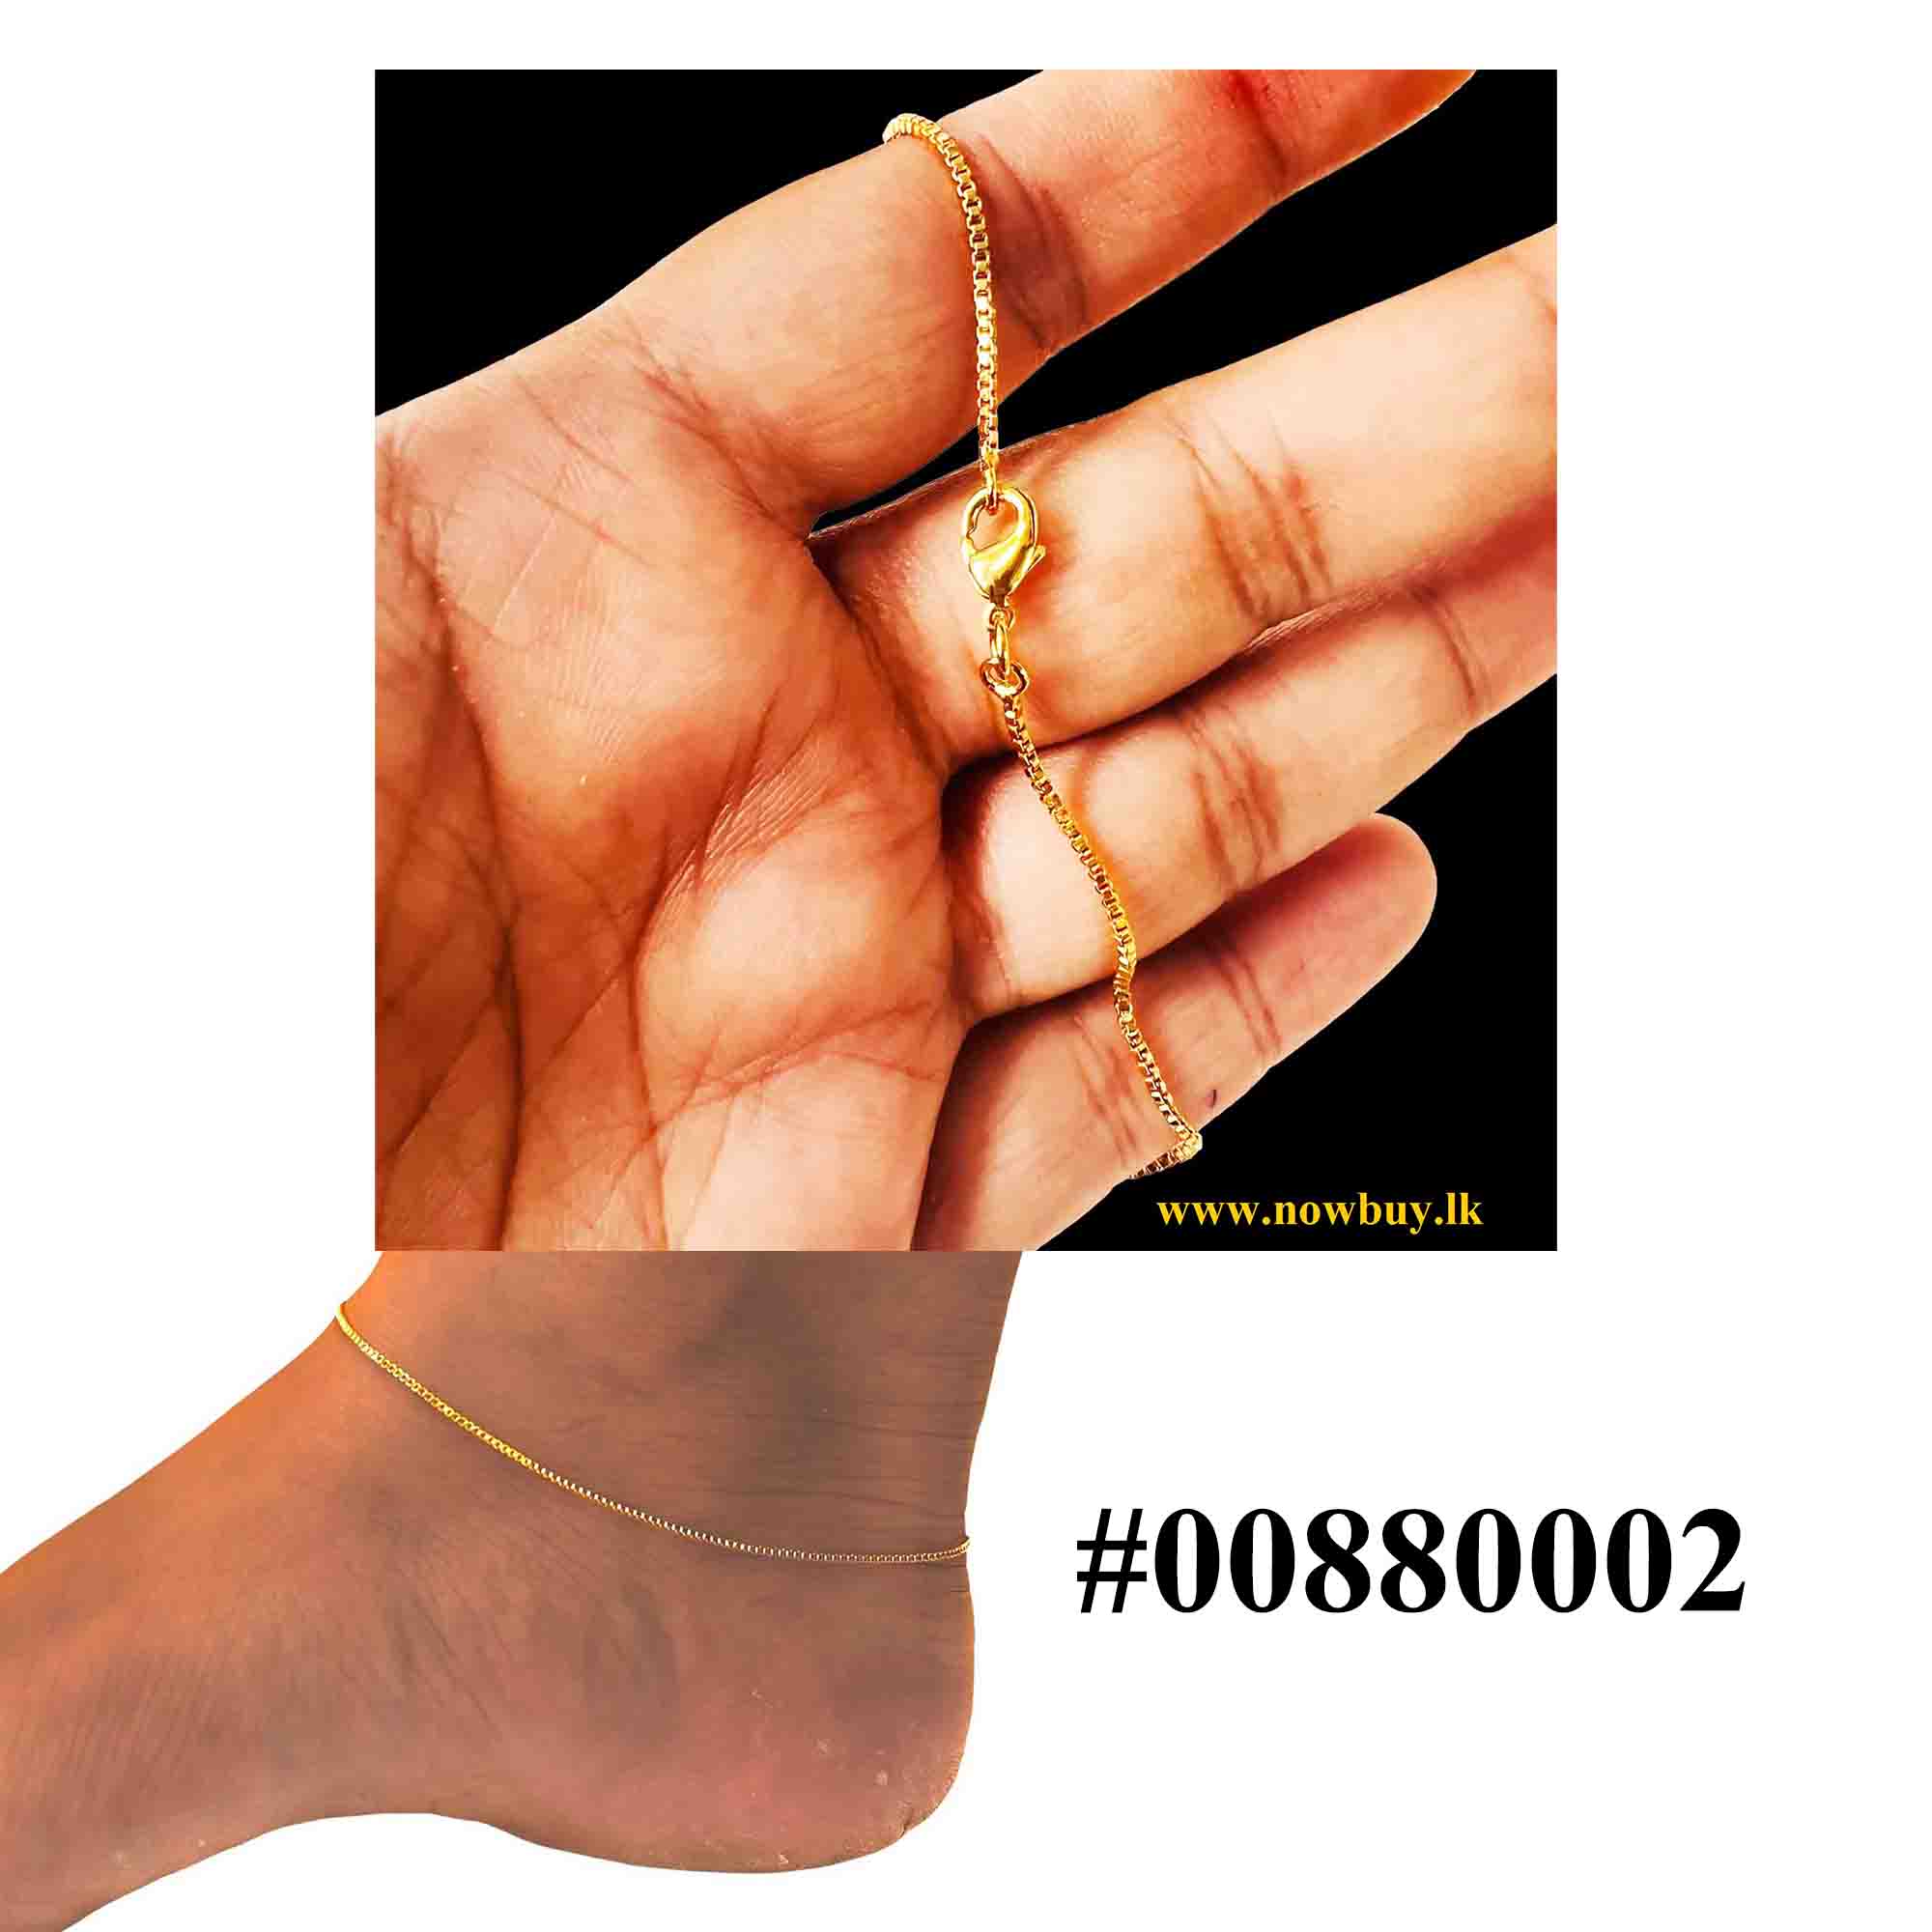 Gold Plated latest Box Type Anklet Foot Jewelry 10inch Box Chain Kolusu for Women Anklets NowBuy.lk 2